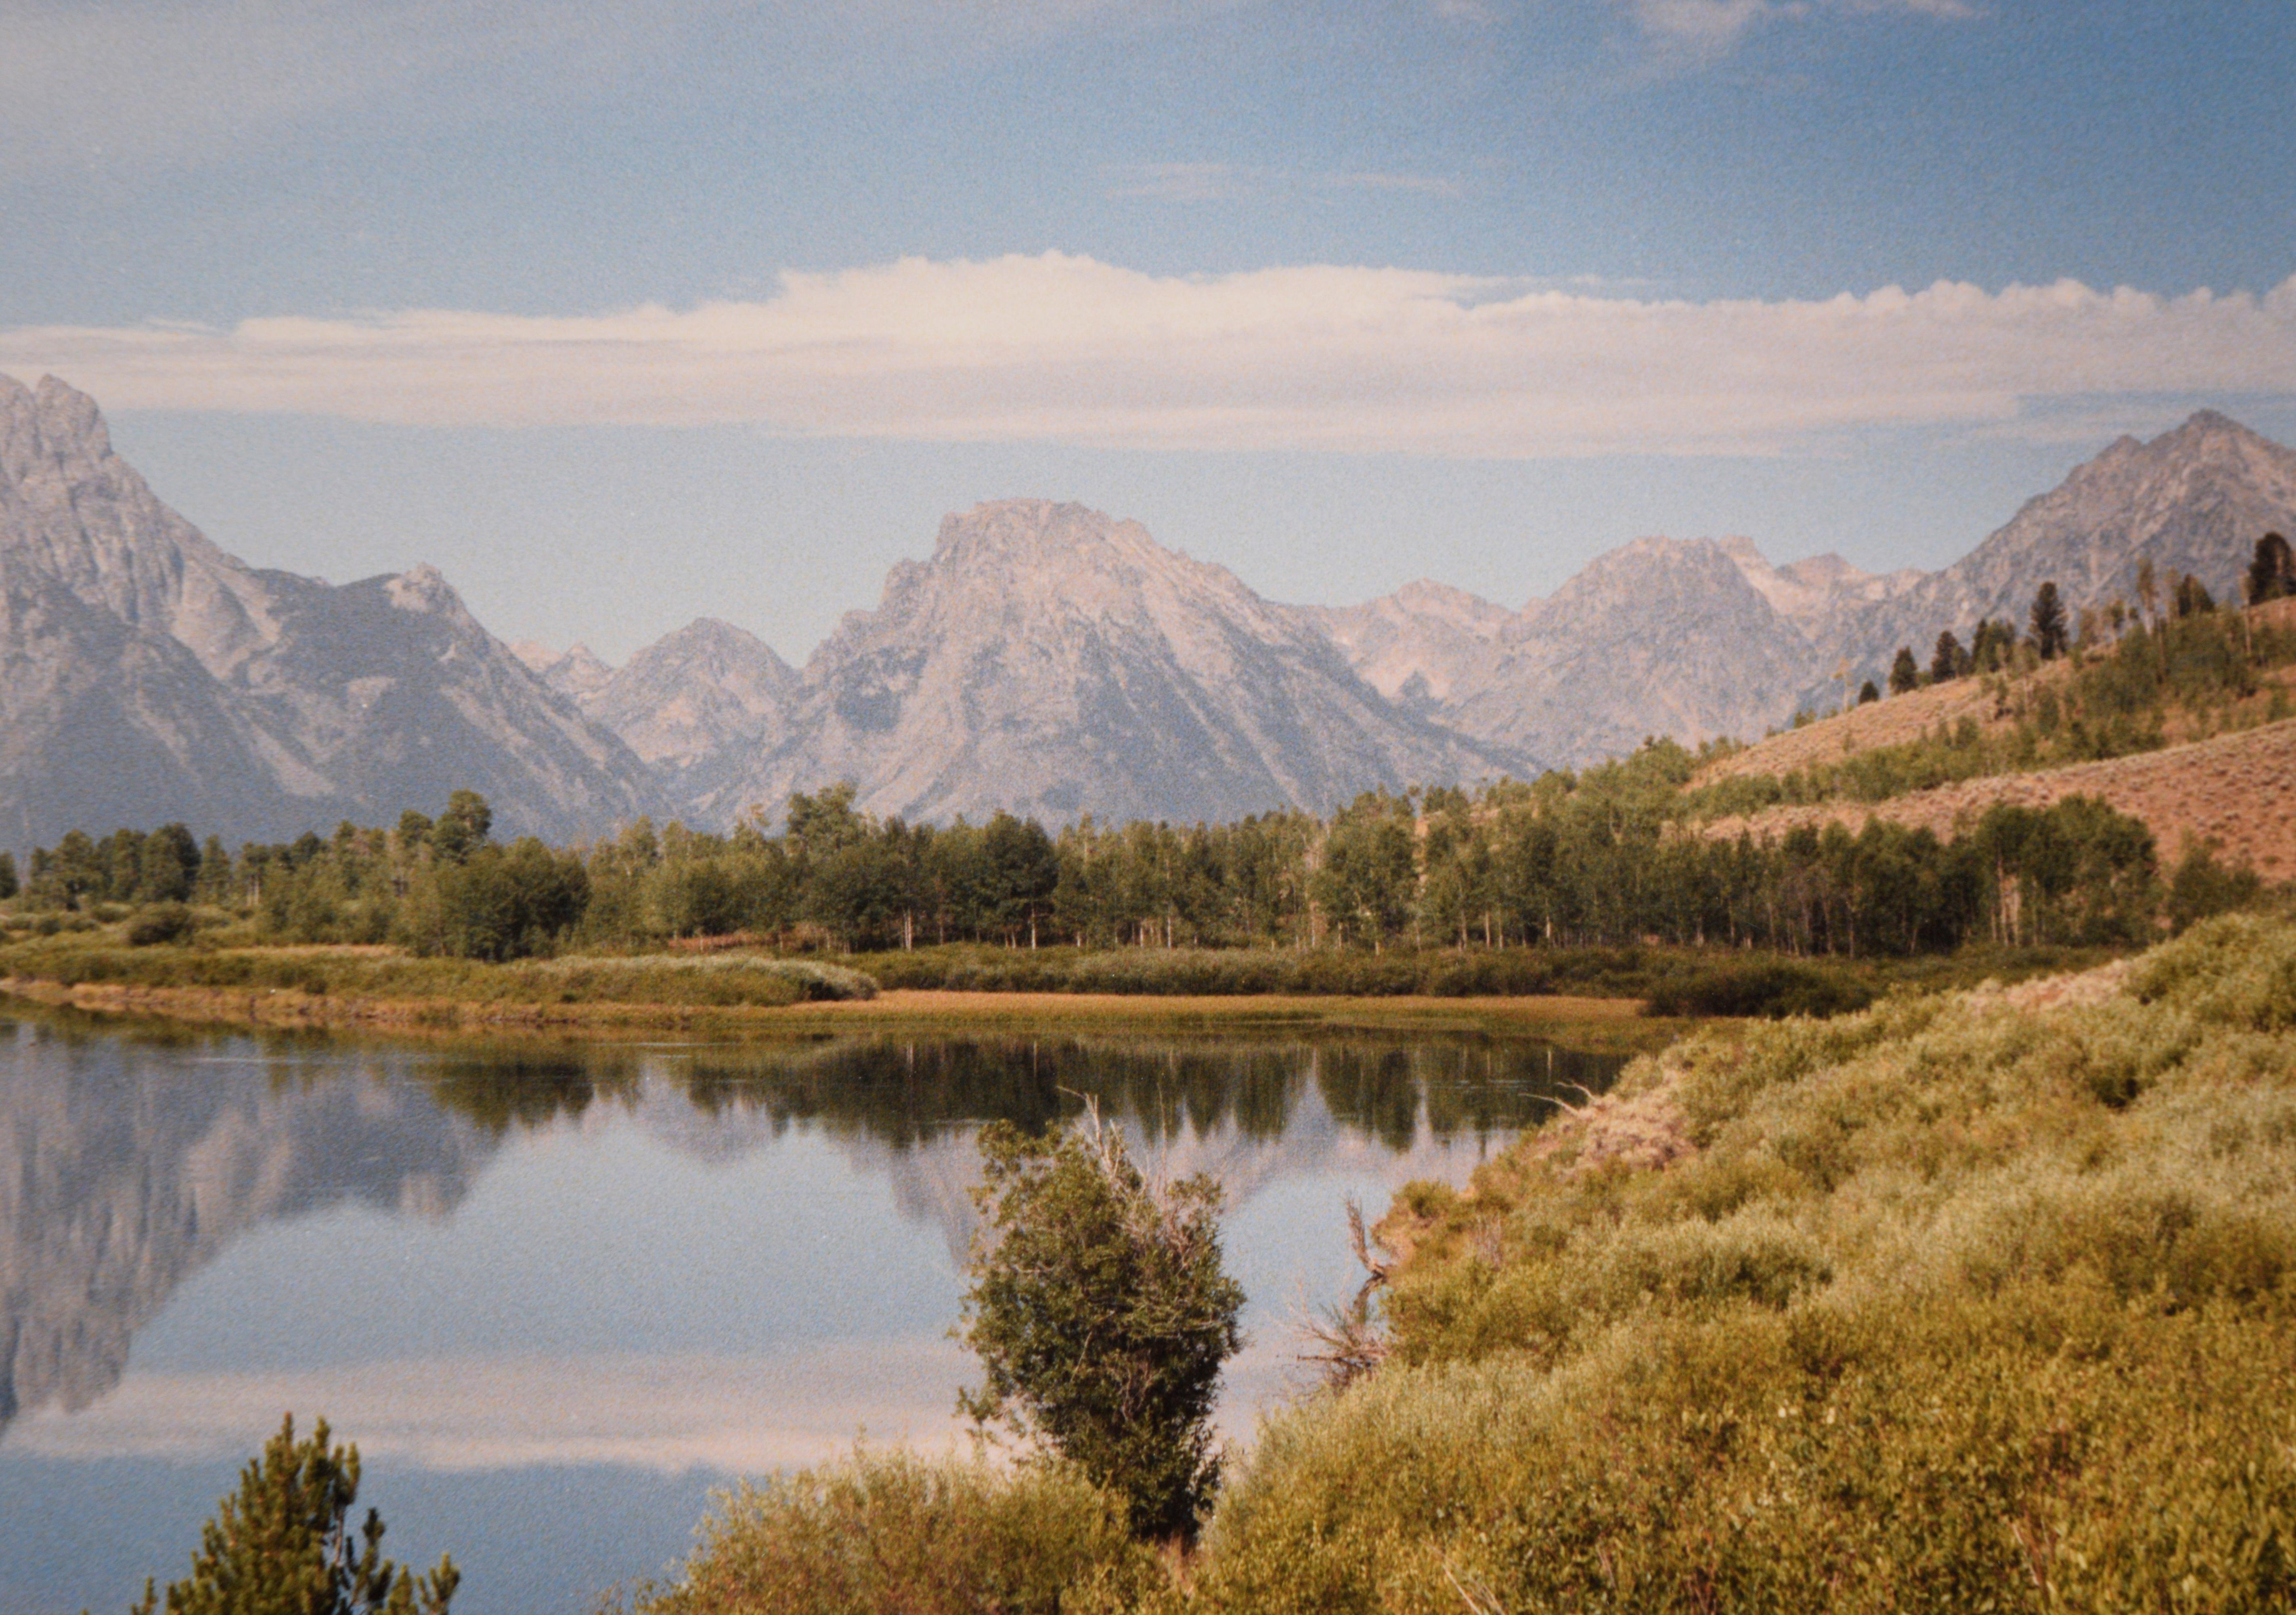 Grand Teton National Park - Original 1988 Photograph

Original 1988 color photograph of the Grand Teton National Park in Wyoming in the Style of Steve Mattheis,
. The photograph shows the Teton mountain range, with its clear reflection on the calm